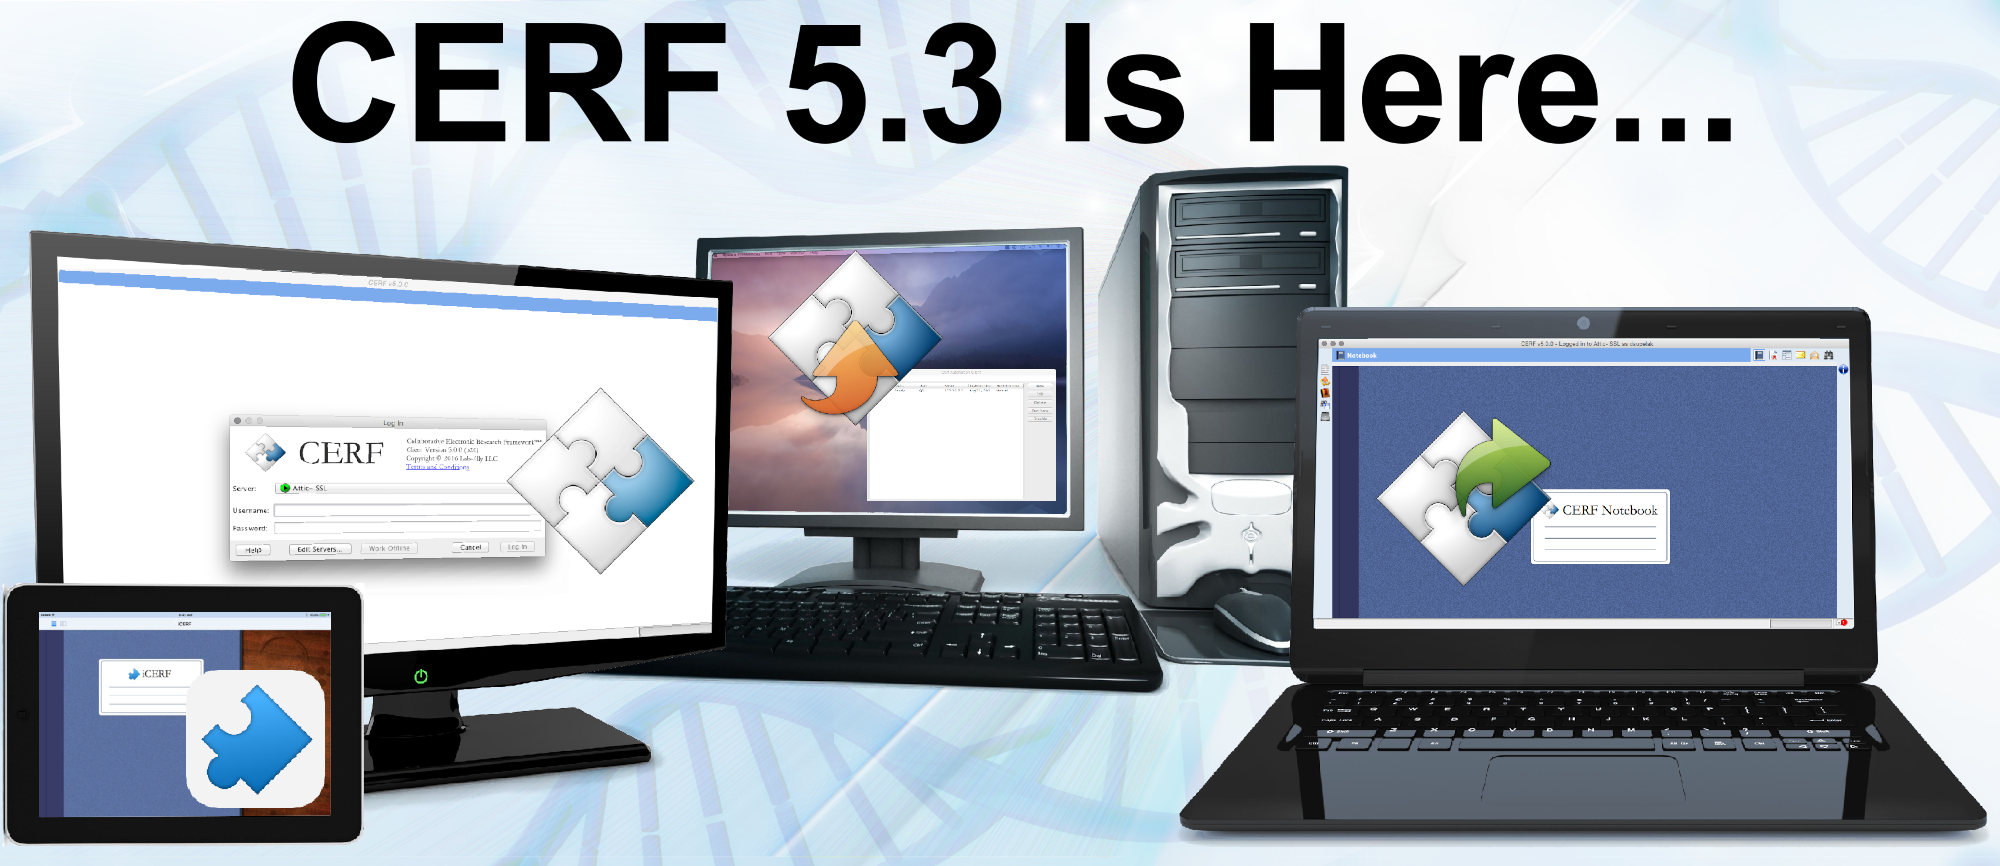 CERF 5.3 is here - Announcing the release of the newest version of CERF ELN